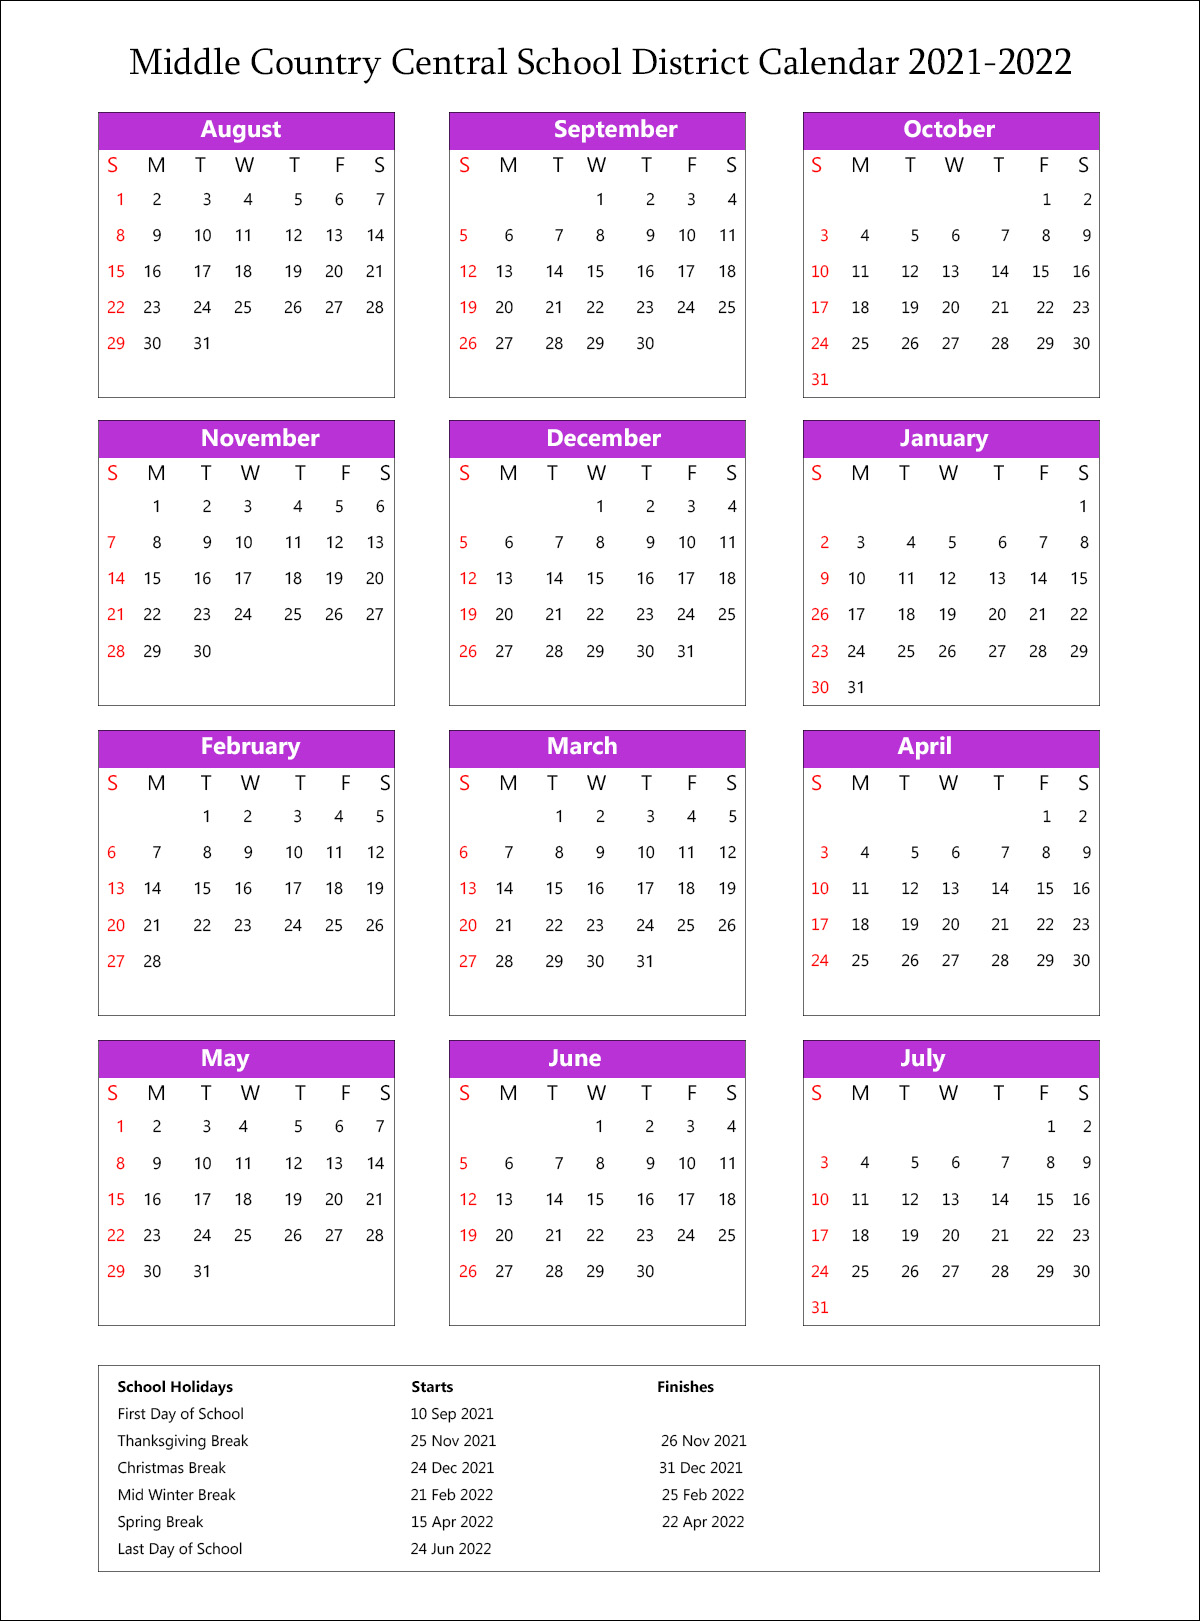 Middle Country Central School District, New York Calendar Holidays 2021